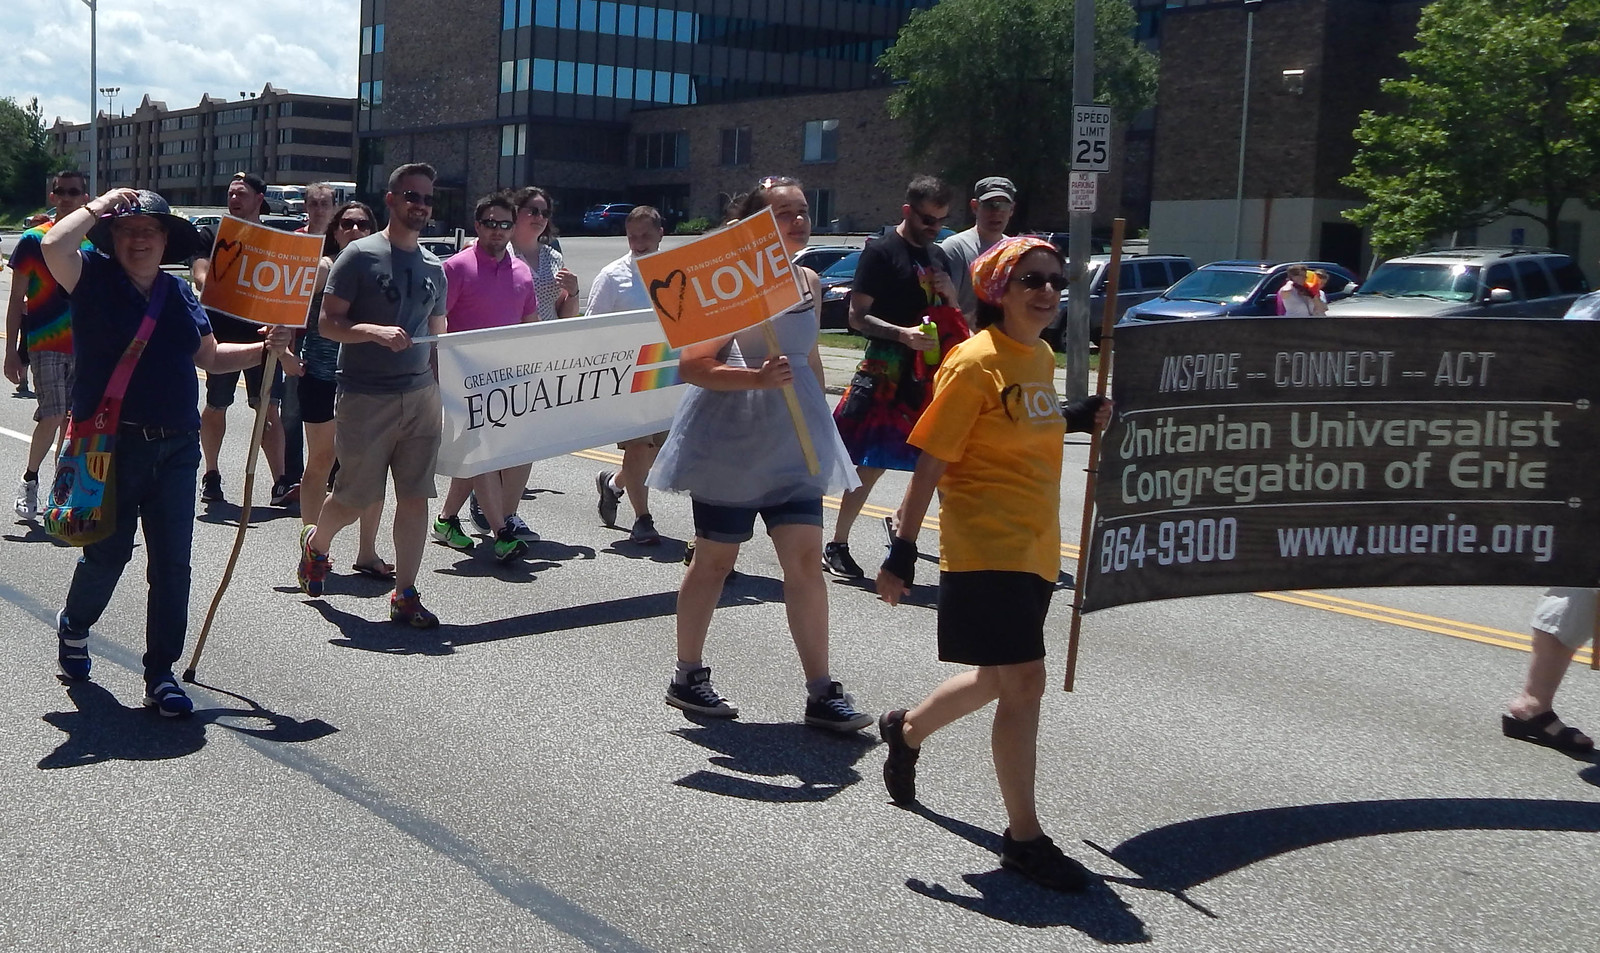 Unitarian Universalist Congregation of Erie and Greater Erie Alliance for Equality marching in Pride Parade